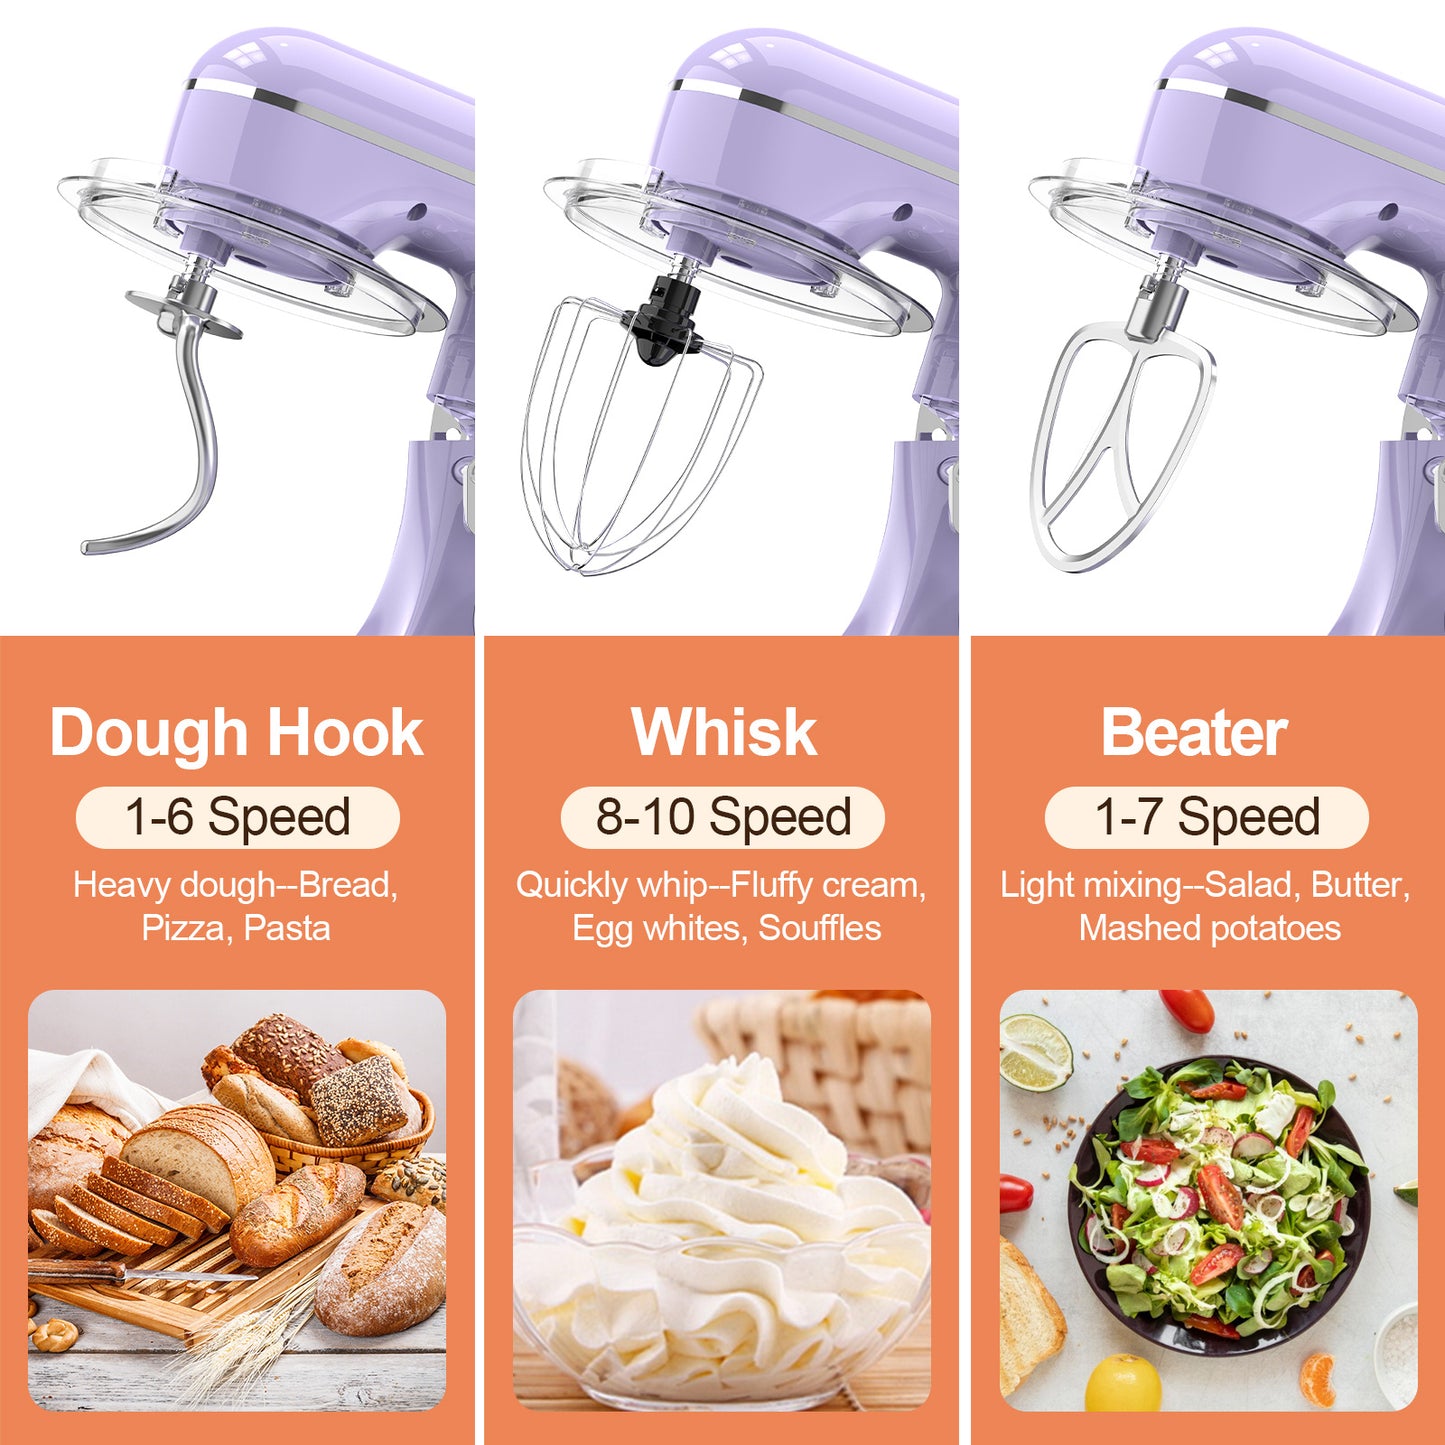 3-IN-1 Electric Stand Mixer, 660W 10-Speed With Pulse Button, Attachments Include 6.5QT Bowl, Dough Hook, Beater, Whisk For Most Home Cooks, Almond Cream